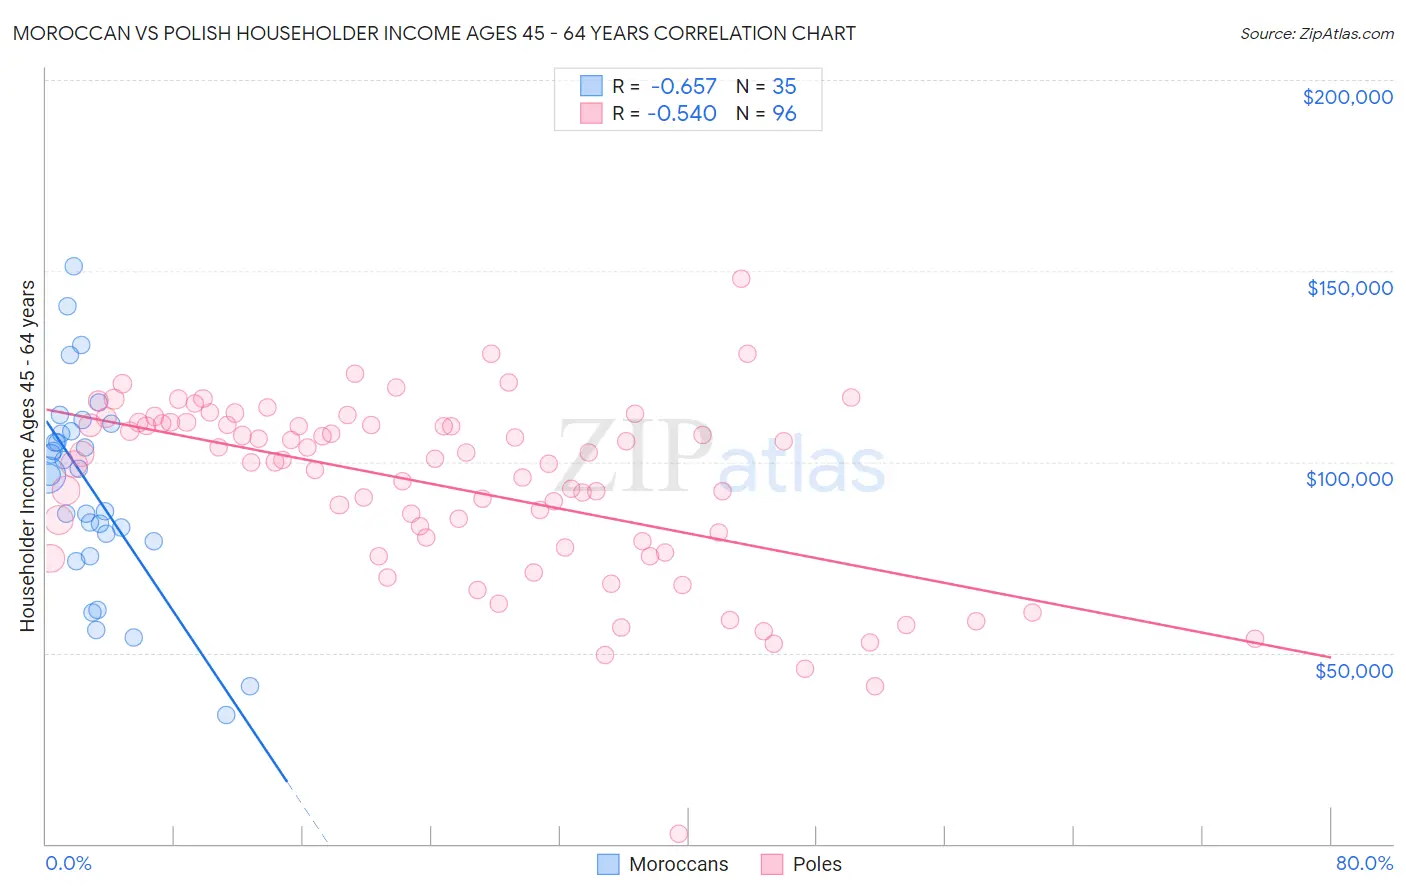 Moroccan vs Polish Householder Income Ages 45 - 64 years